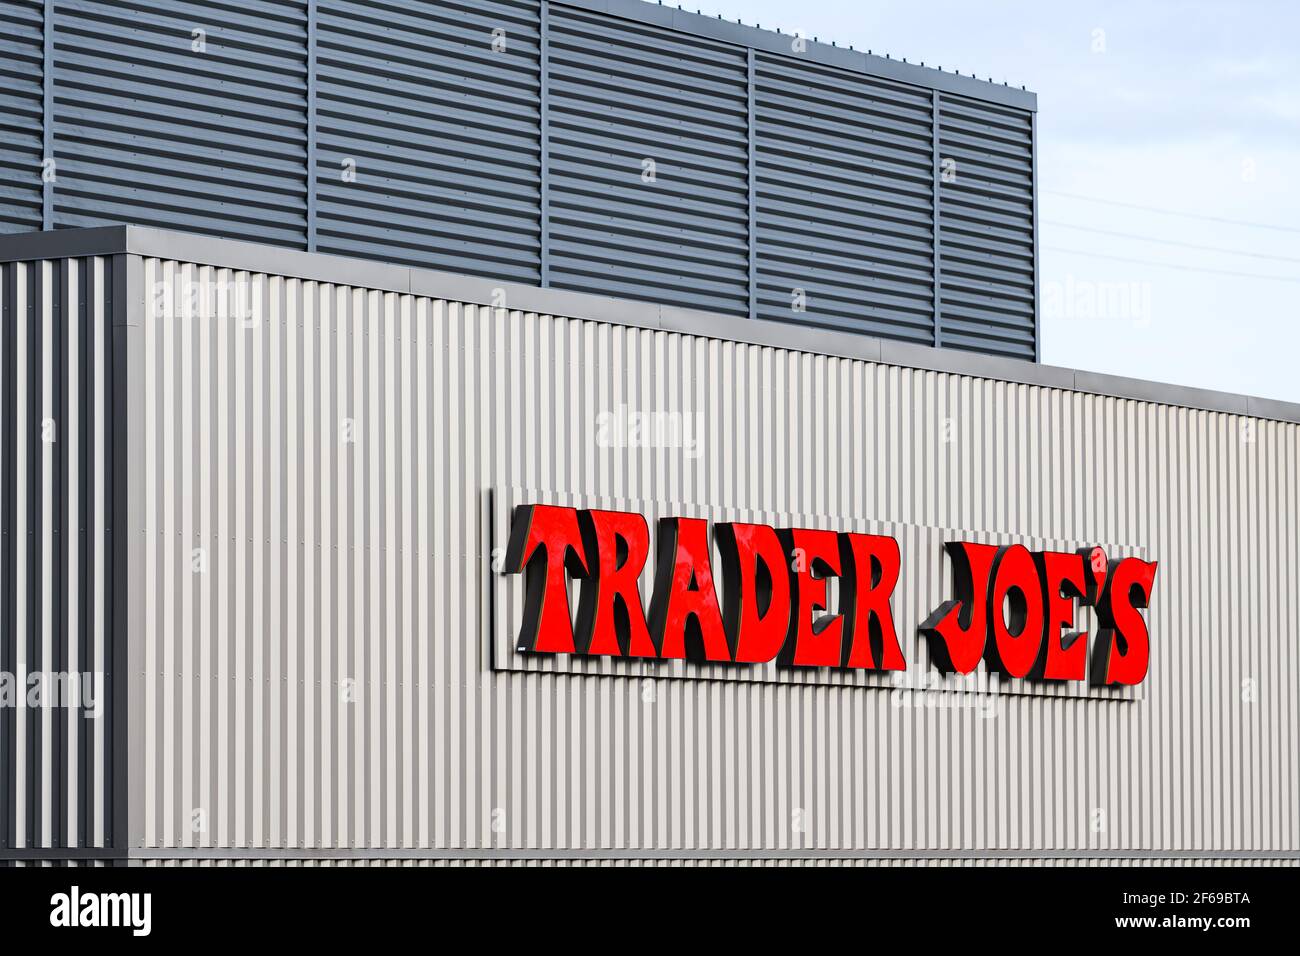 Bellevue, WA, USA - March 30, 2021; Company sign at a Trader Joe's business location in Bellevue Washington on a pale colored container Stock Photo